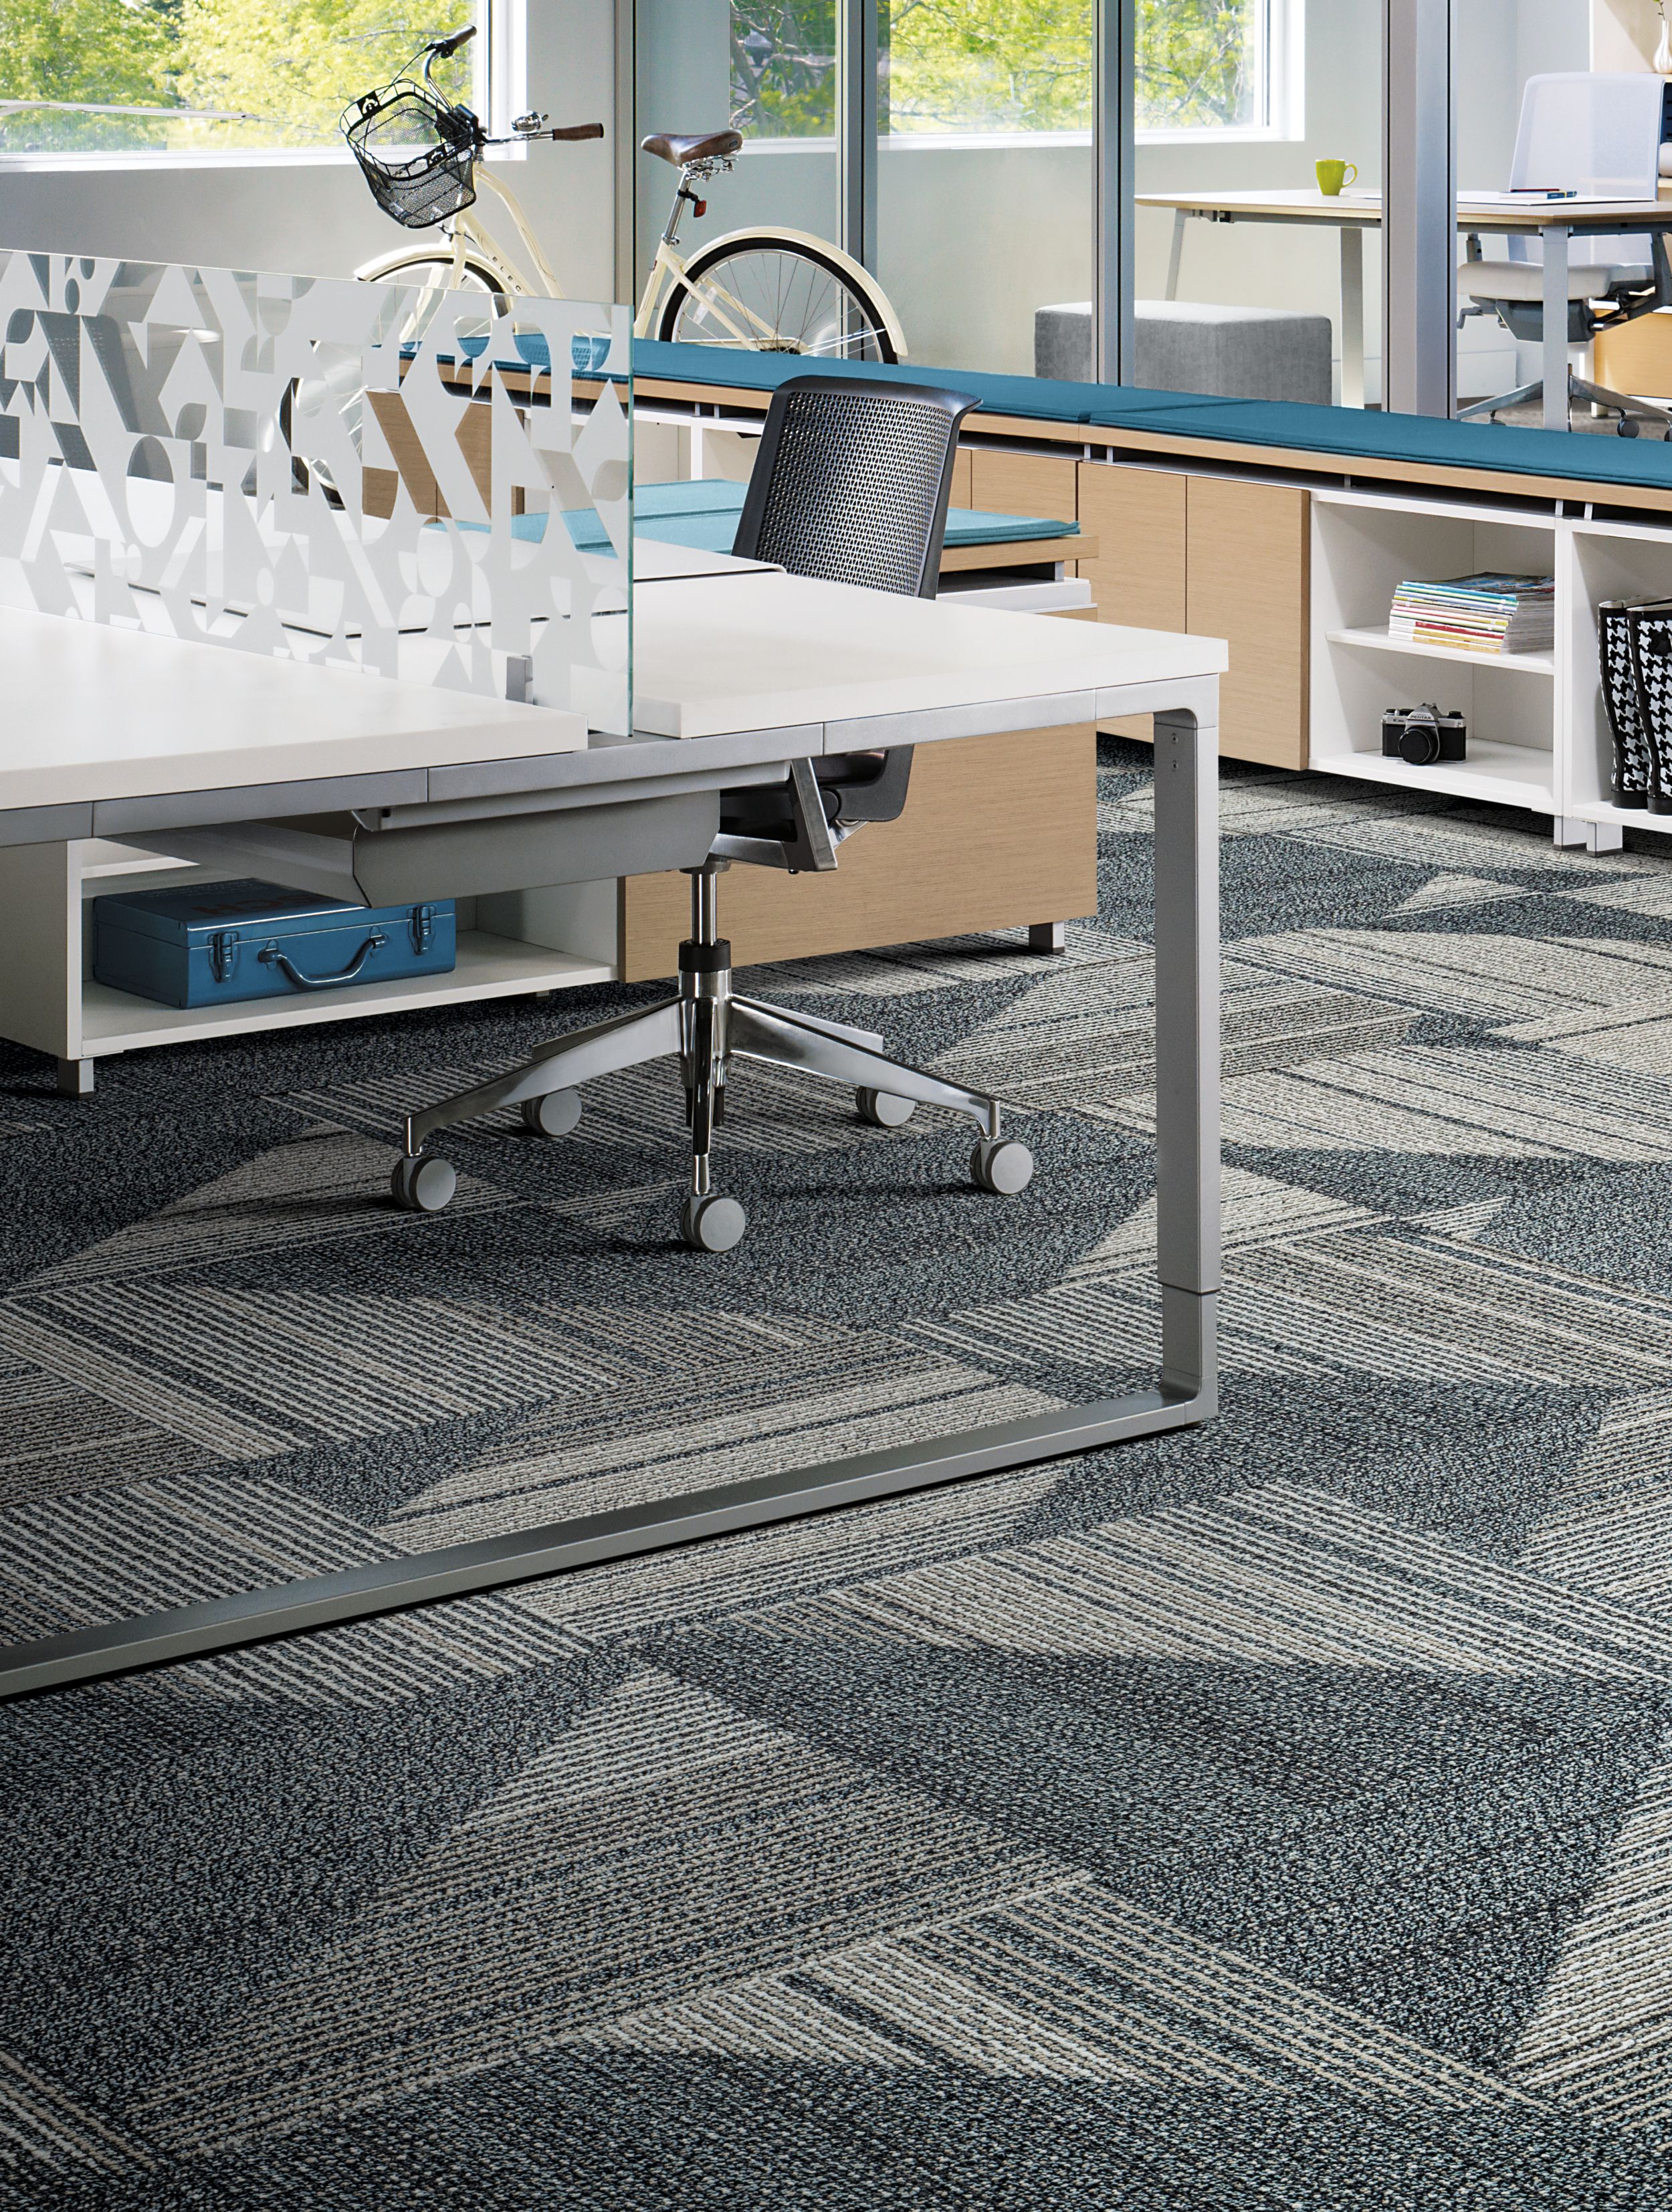 Interface Detours Ahead carpet tile in classroom area with tables and a chair numéro d’image 4